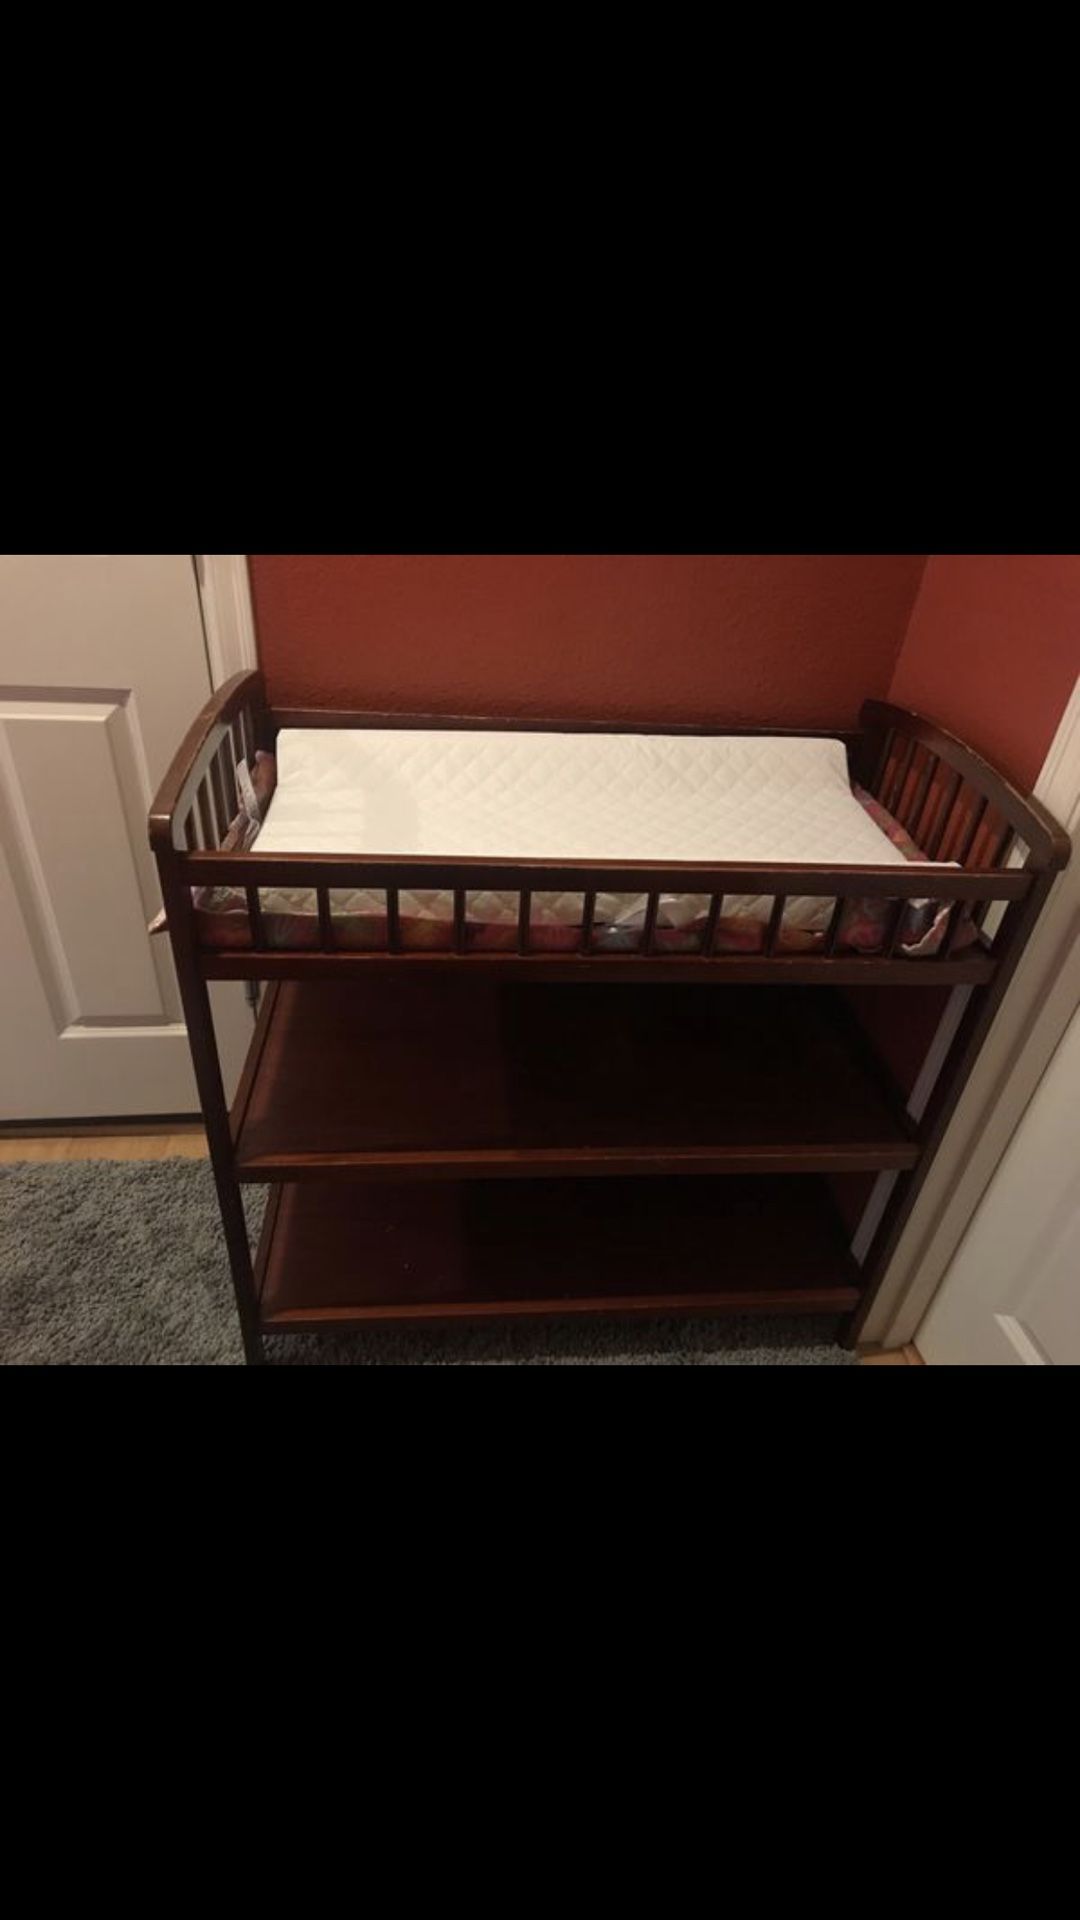 Changing diaper table